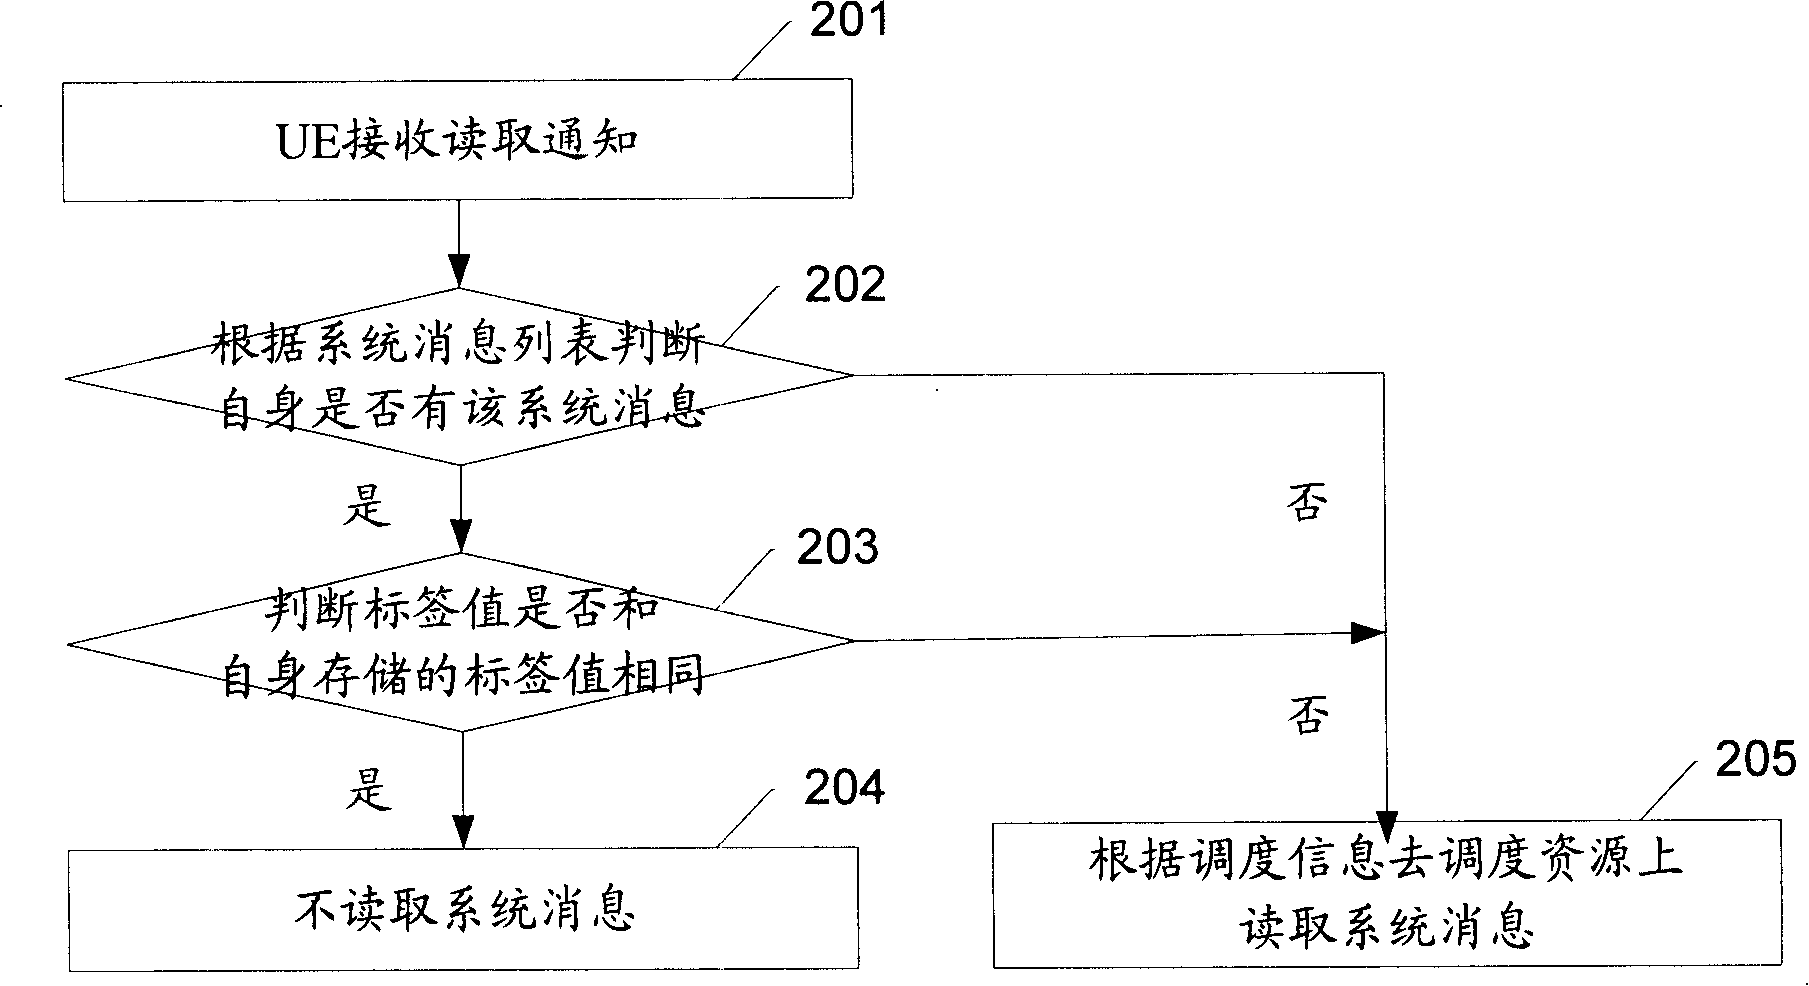 System and method for capturing system message as well as method for sending system message